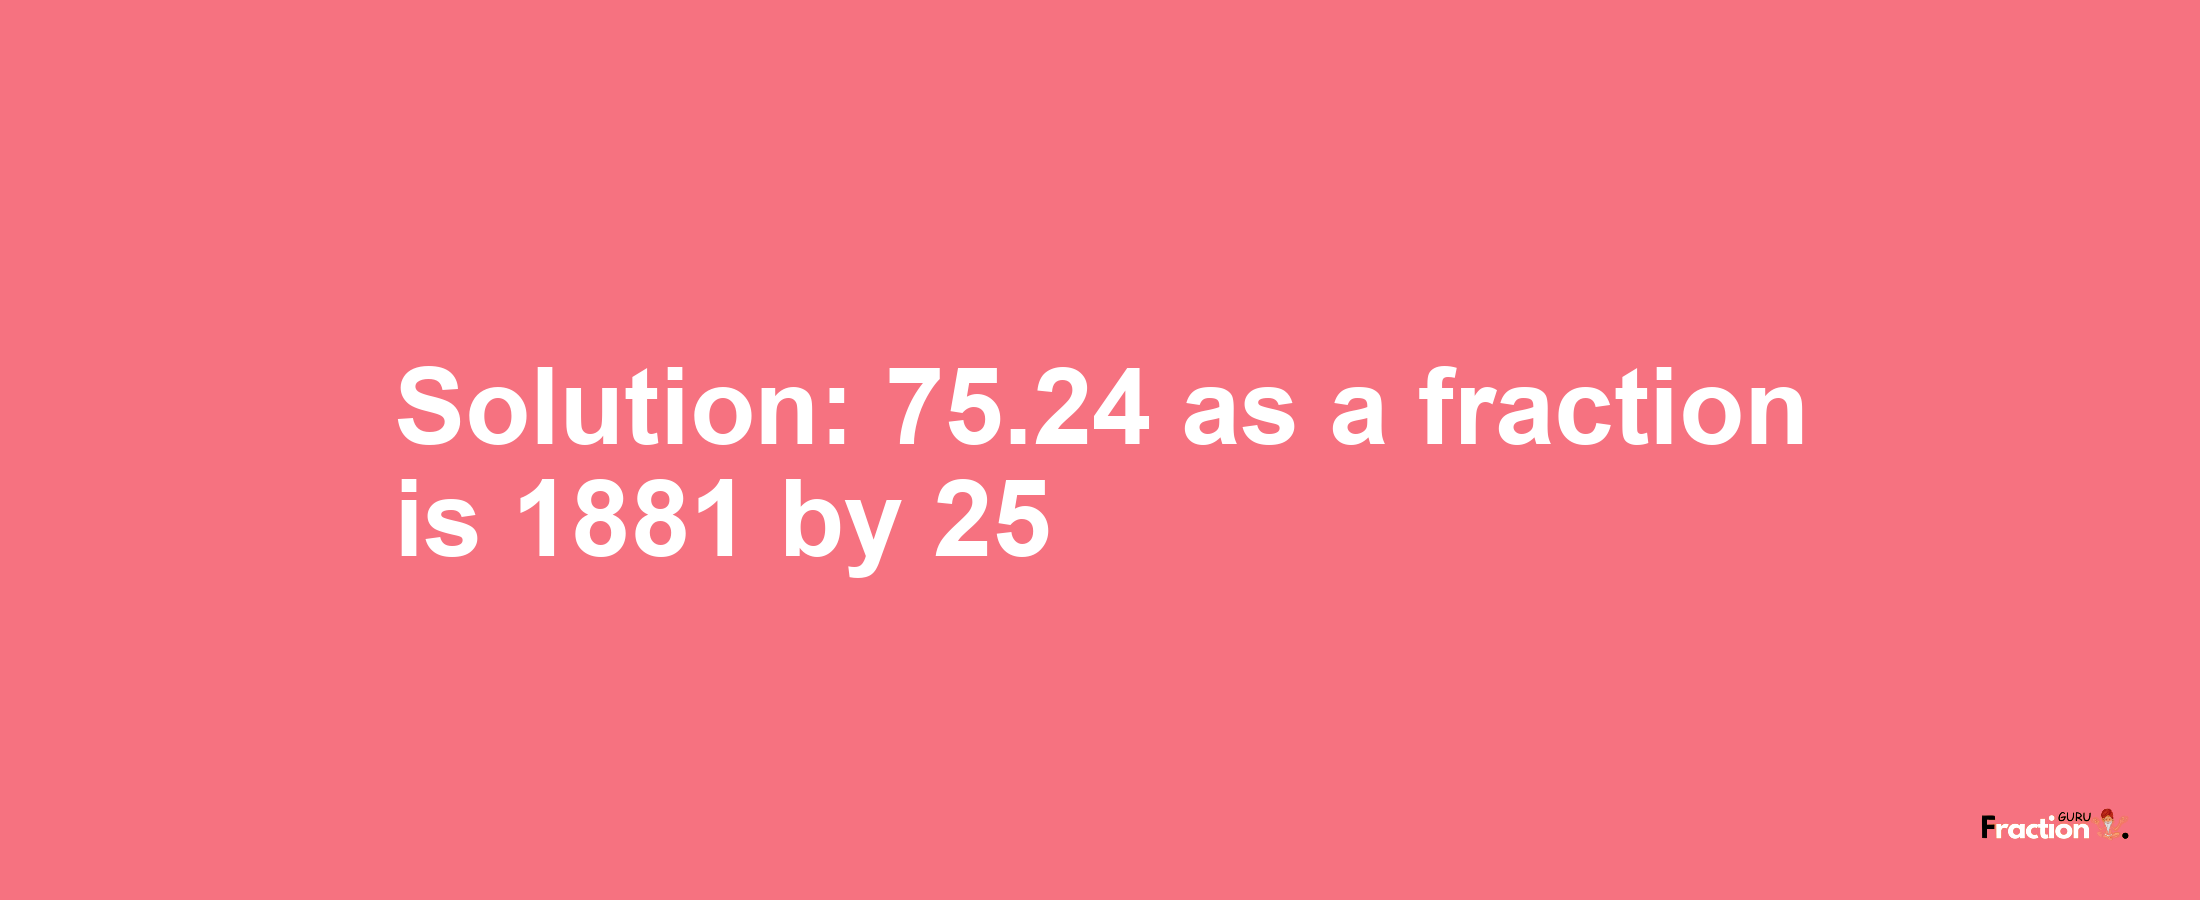 Solution:75.24 as a fraction is 1881/25